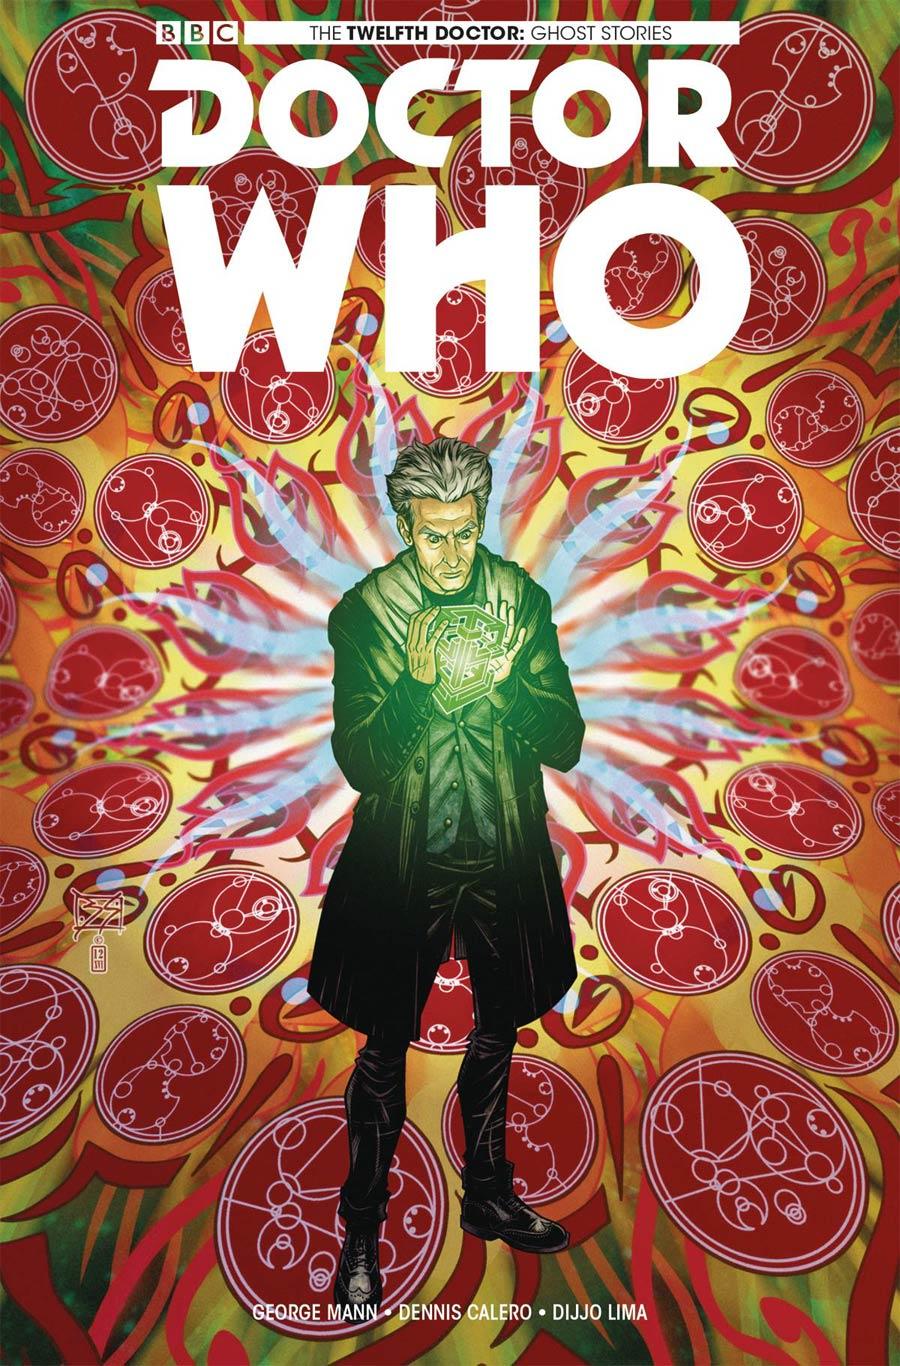 Doctor Who Ghost Stories Vol. 1 #3